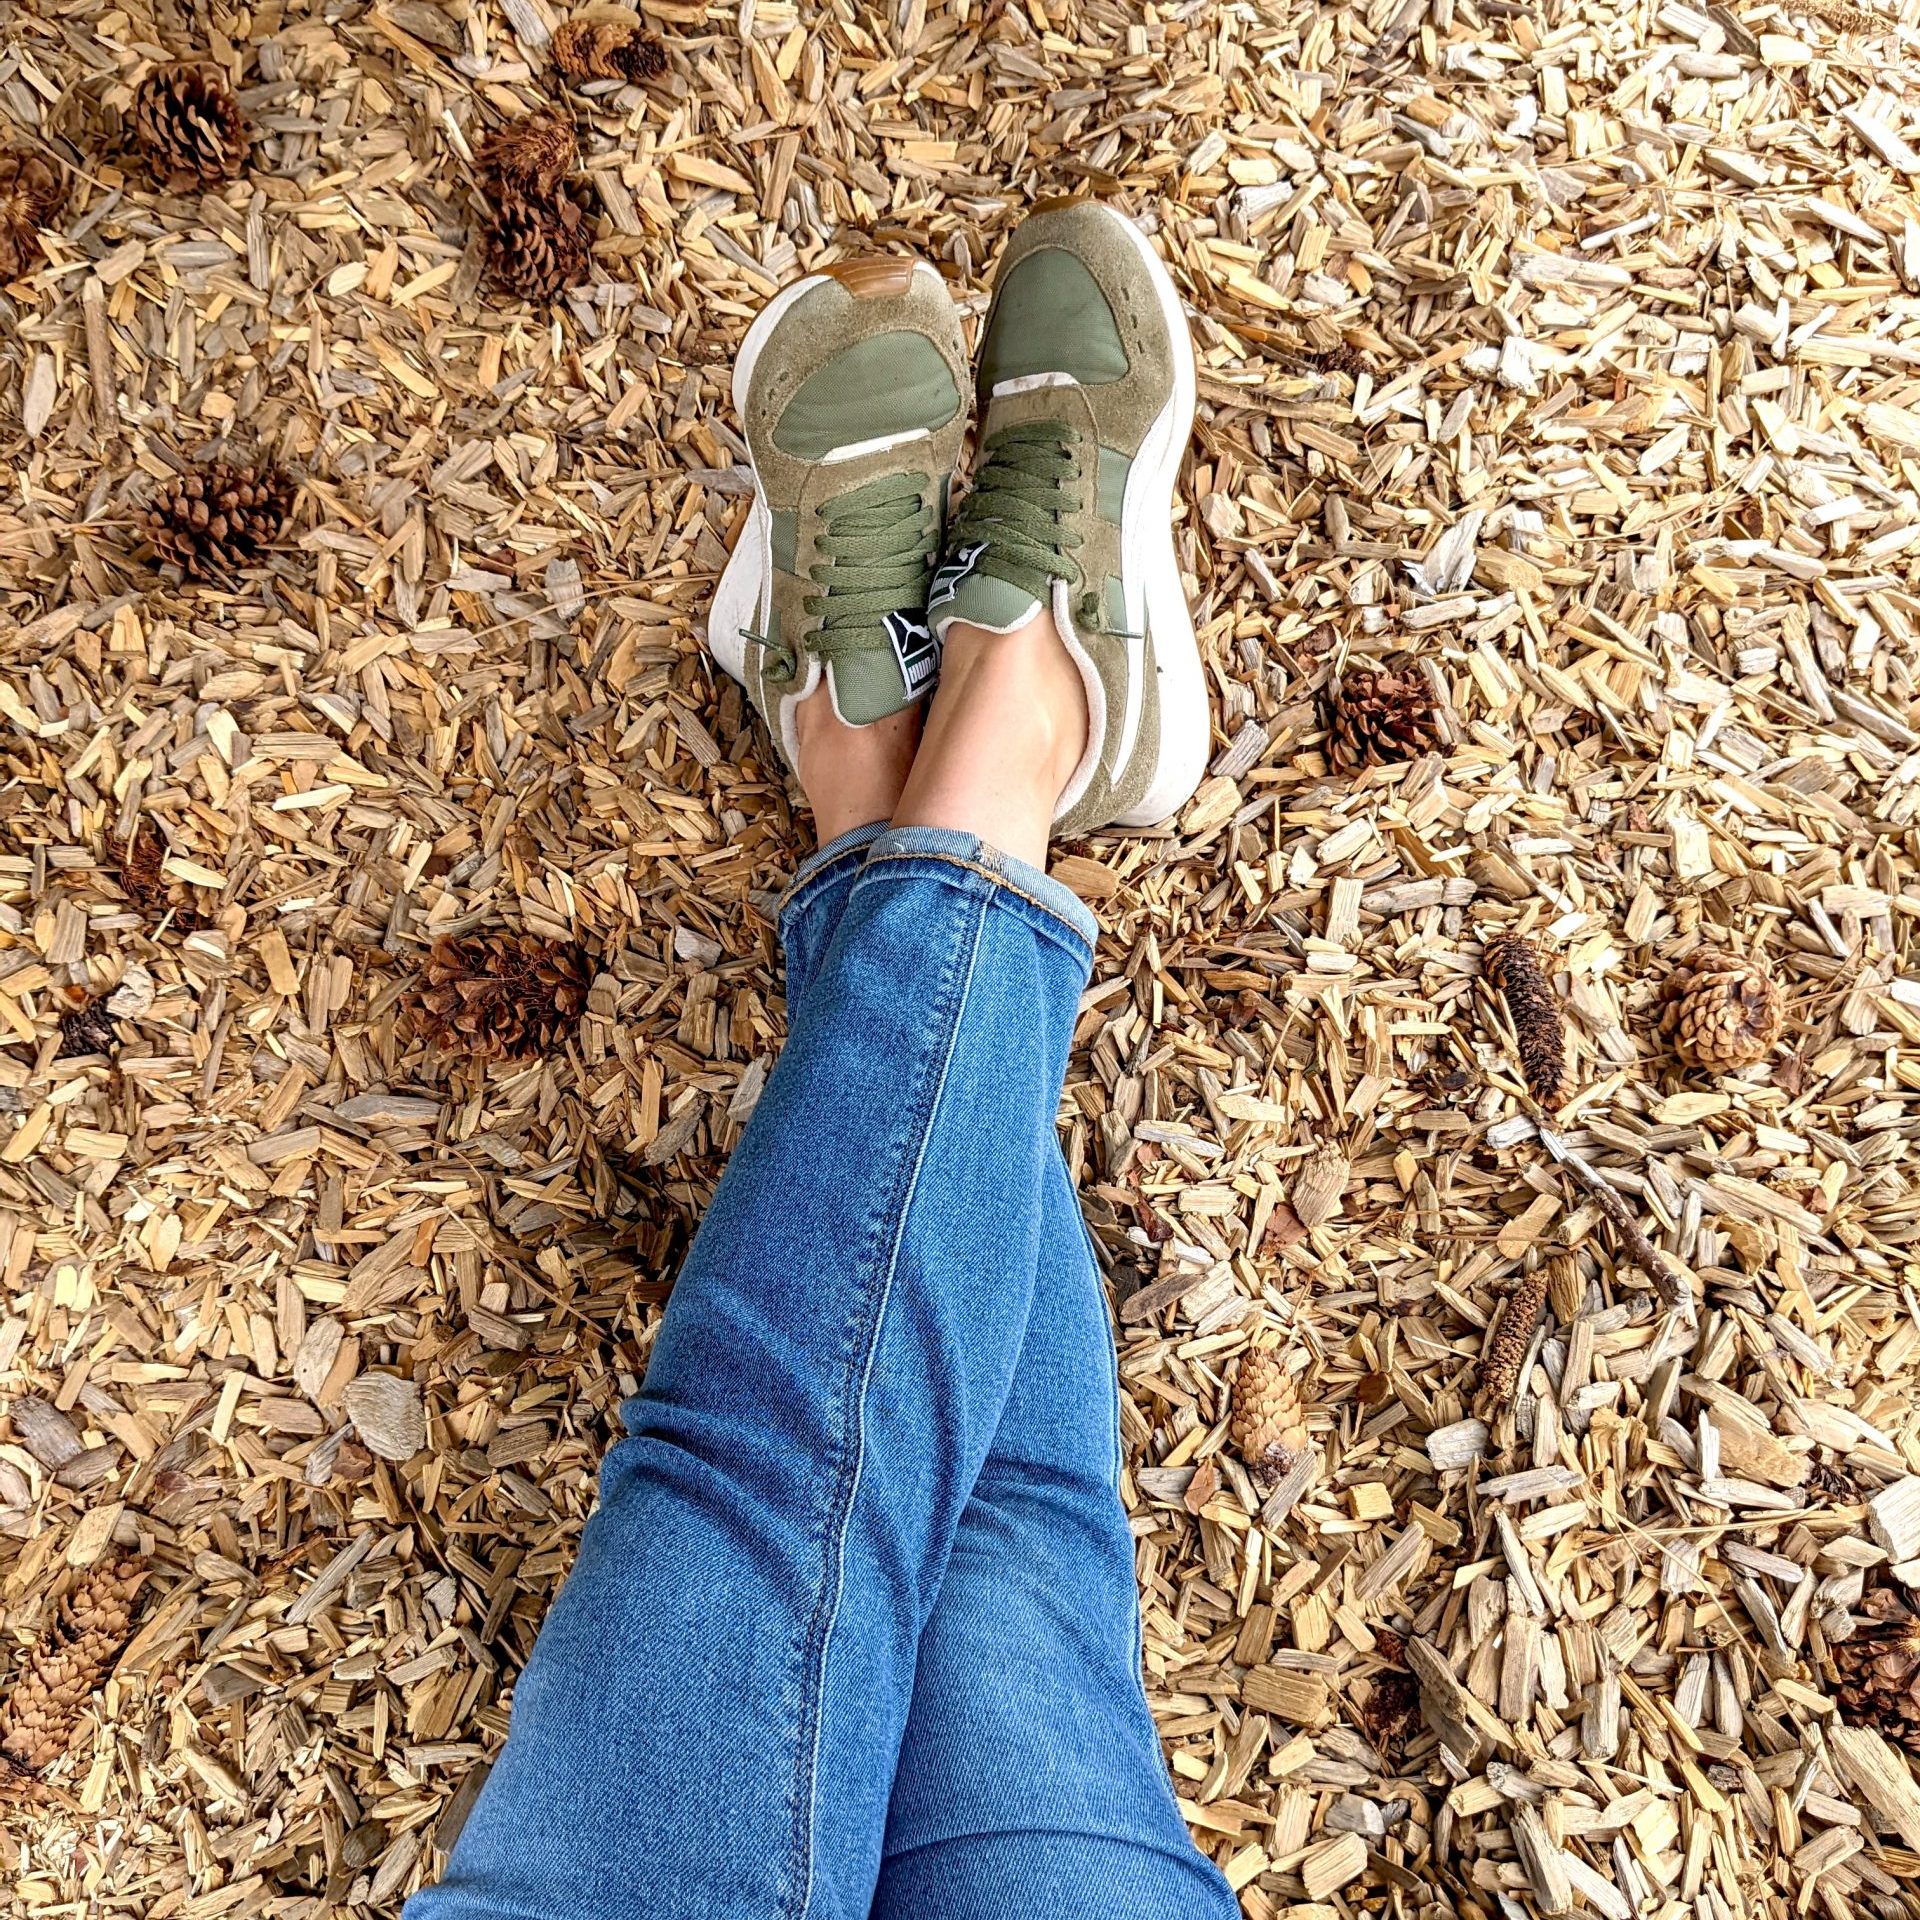 legs extended with feet crossed sitting in wood chips with pine cones